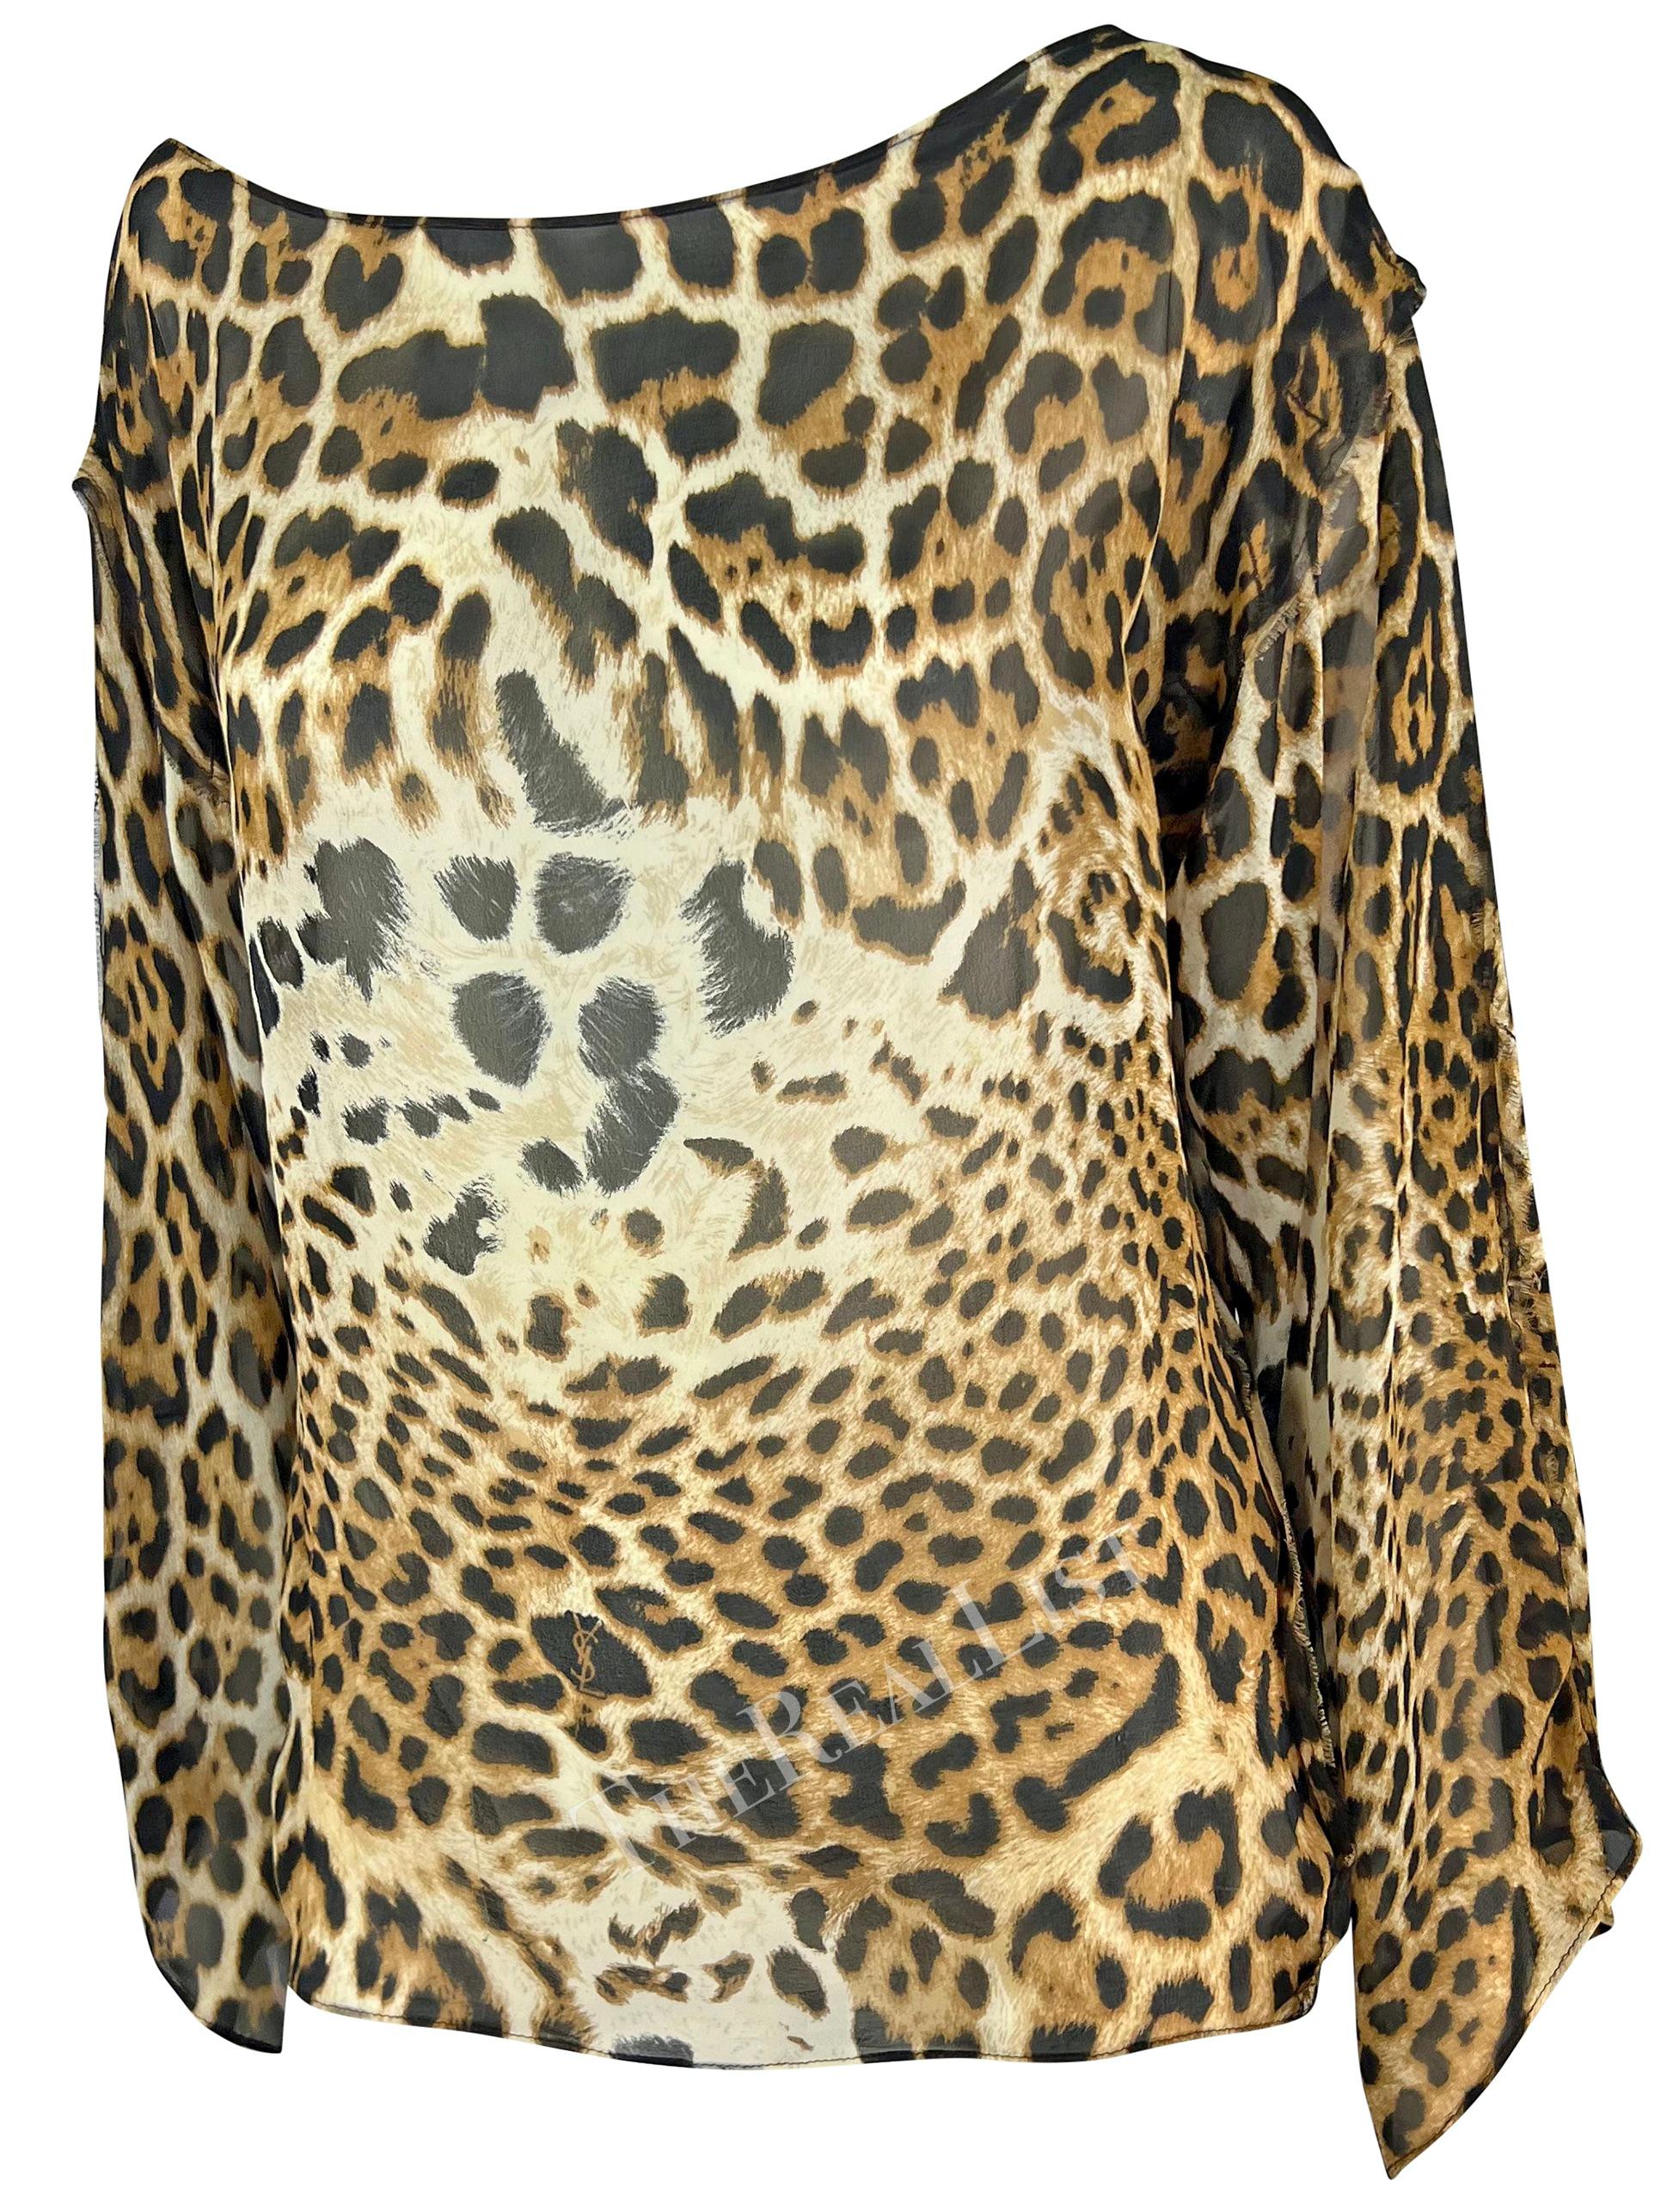 S/S 2002 Yves Saint Laurent by Tom Ford Safari Cheetah Print Sheer Silk Top In Excellent Condition For Sale In West Hollywood, CA